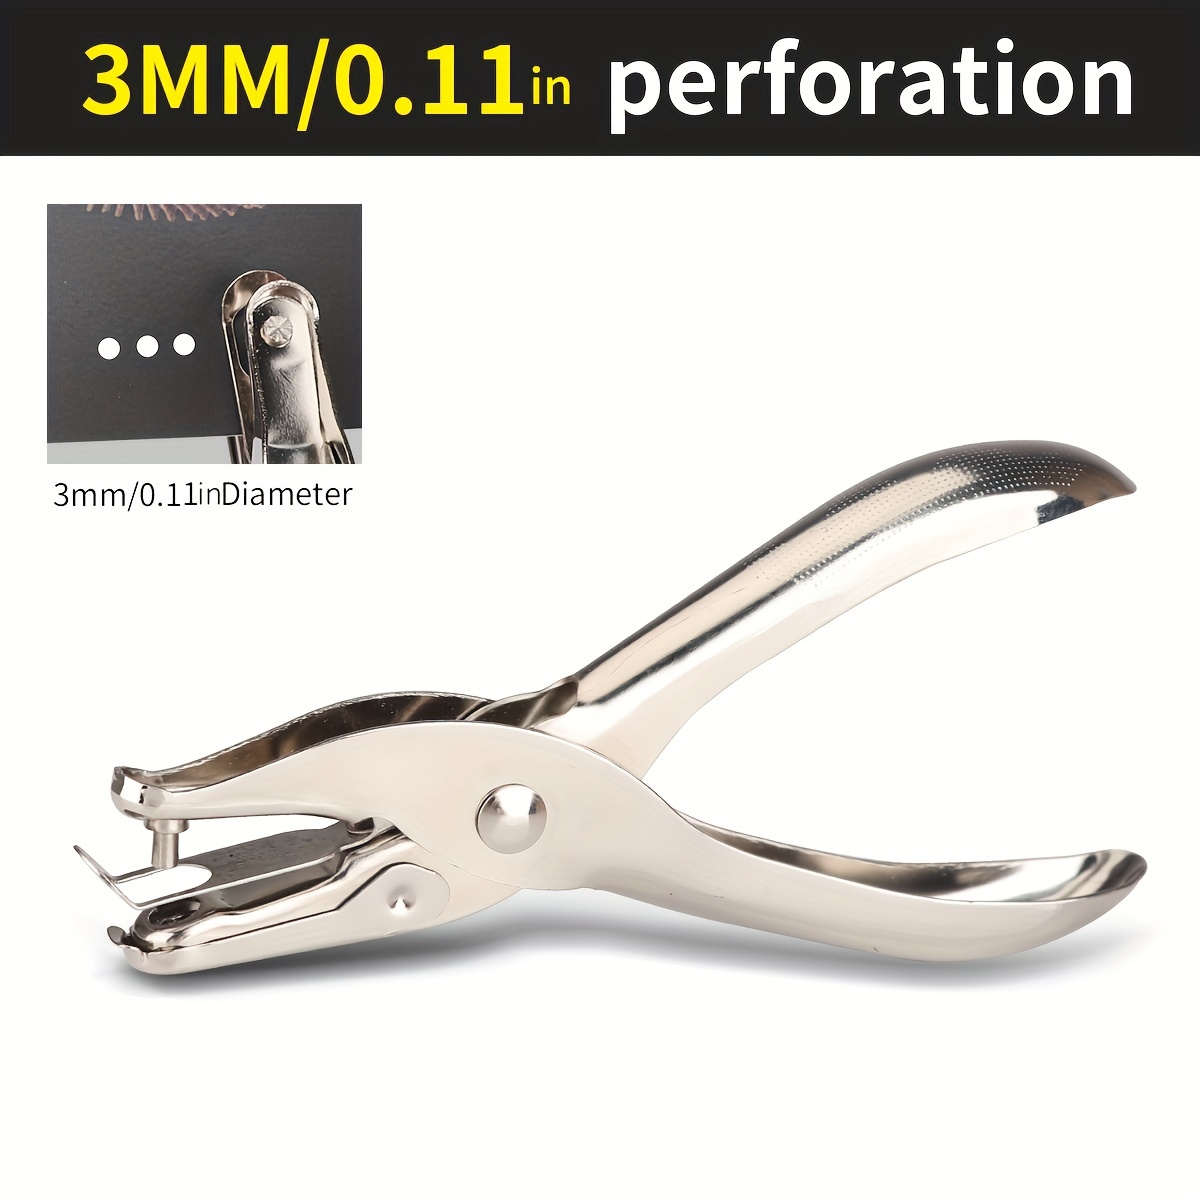 Paper Card Plier Hole Punch Universal Size 6mm Single Hole Puncher